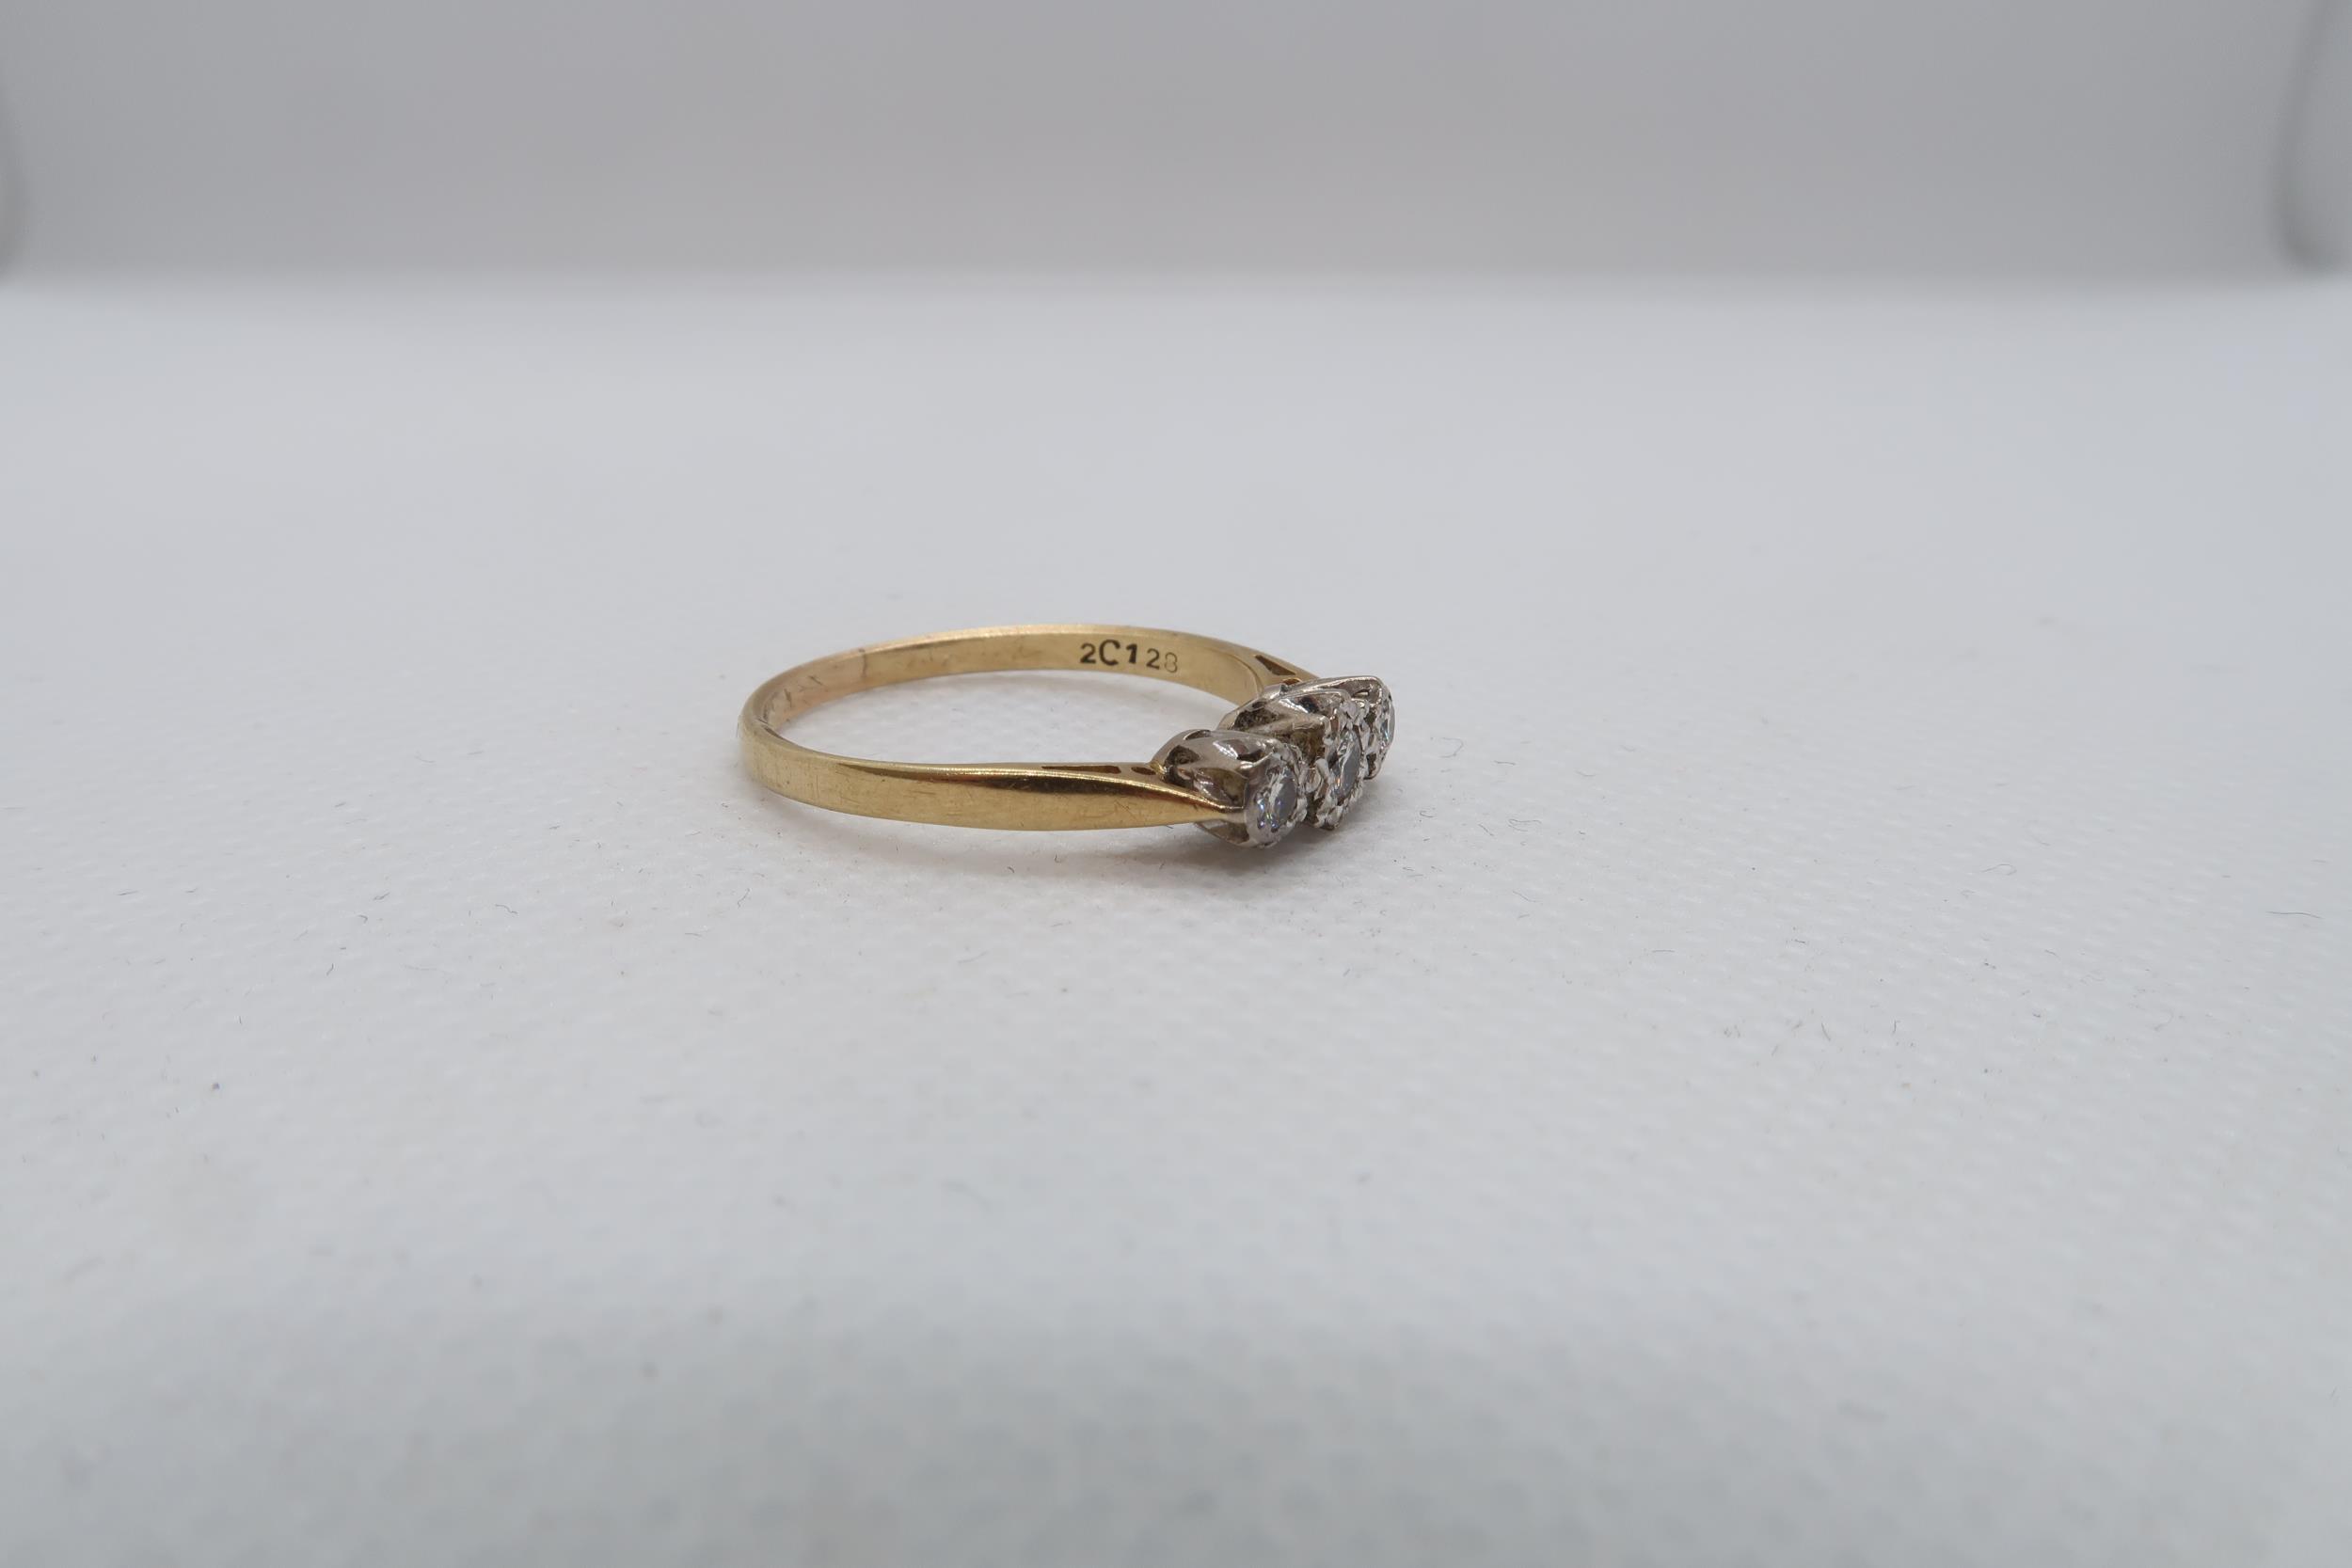 An 18ct yellow gold (hallmarked) three stone diamond ring size R - weight approx 2.8 grams - Image 2 of 3